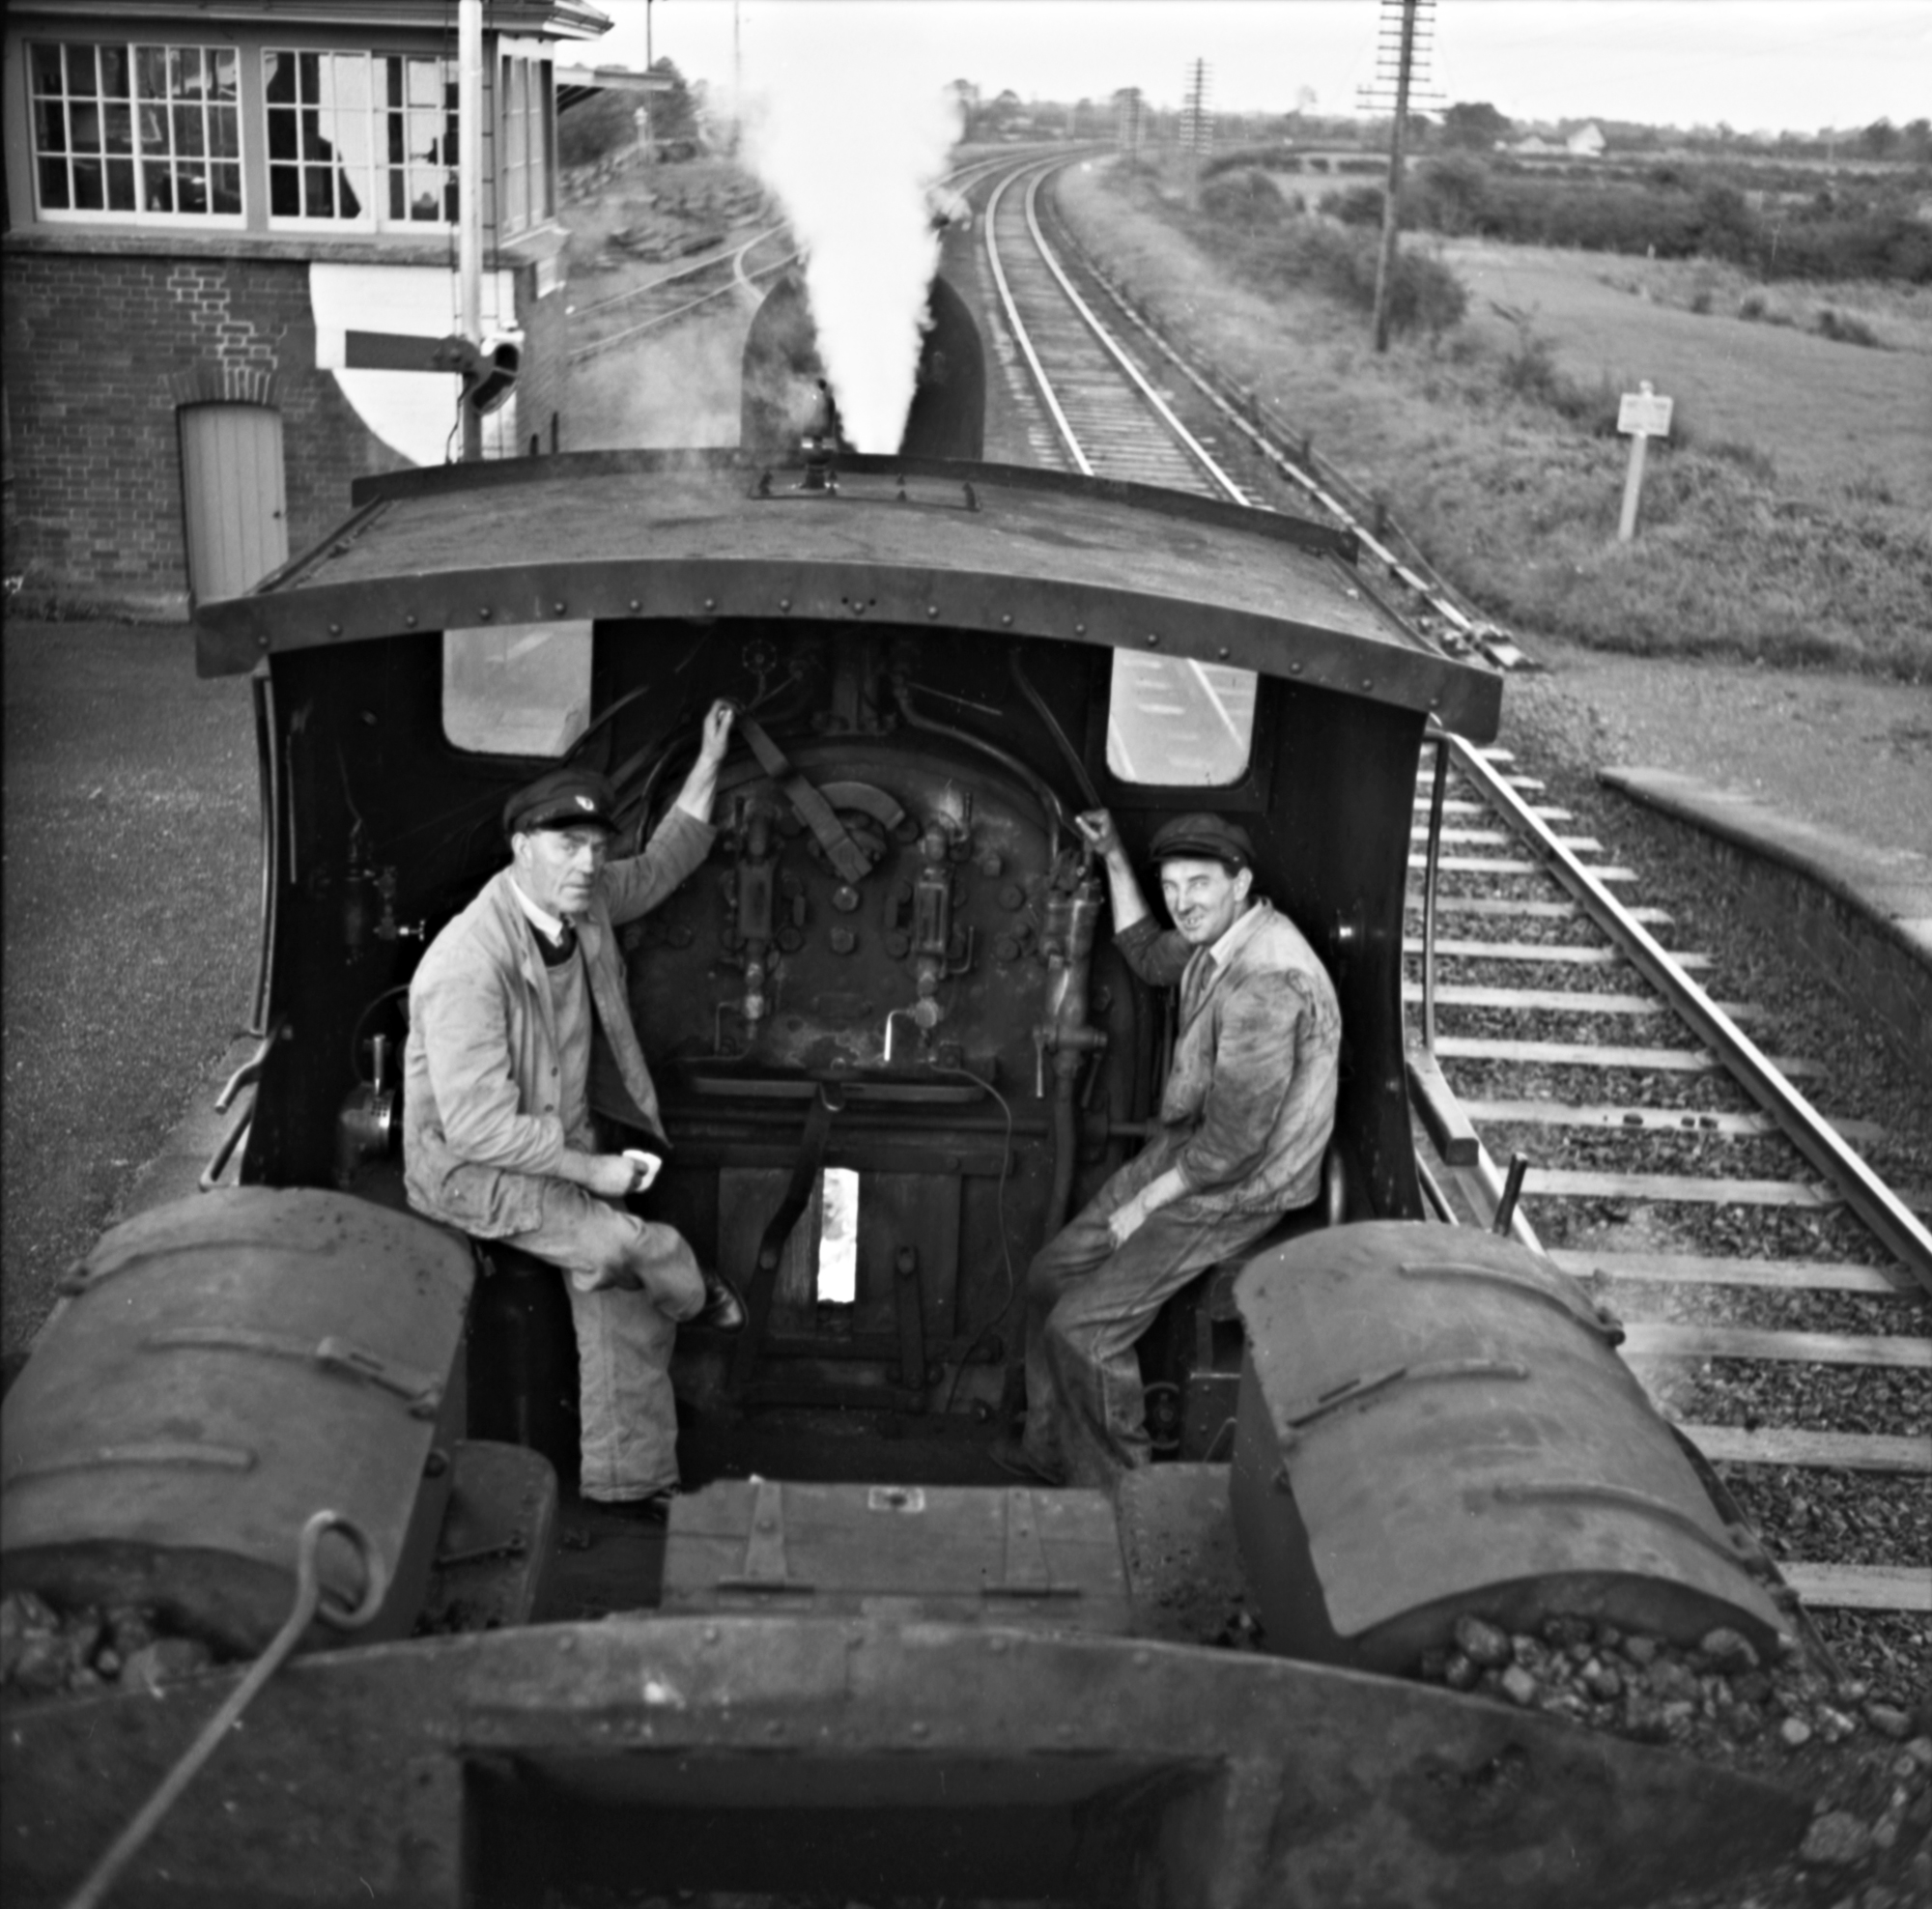 O'DEA (1962) - Interior view of driving cab with two drivers on train passing through Straffan railway station, Co. Kildare